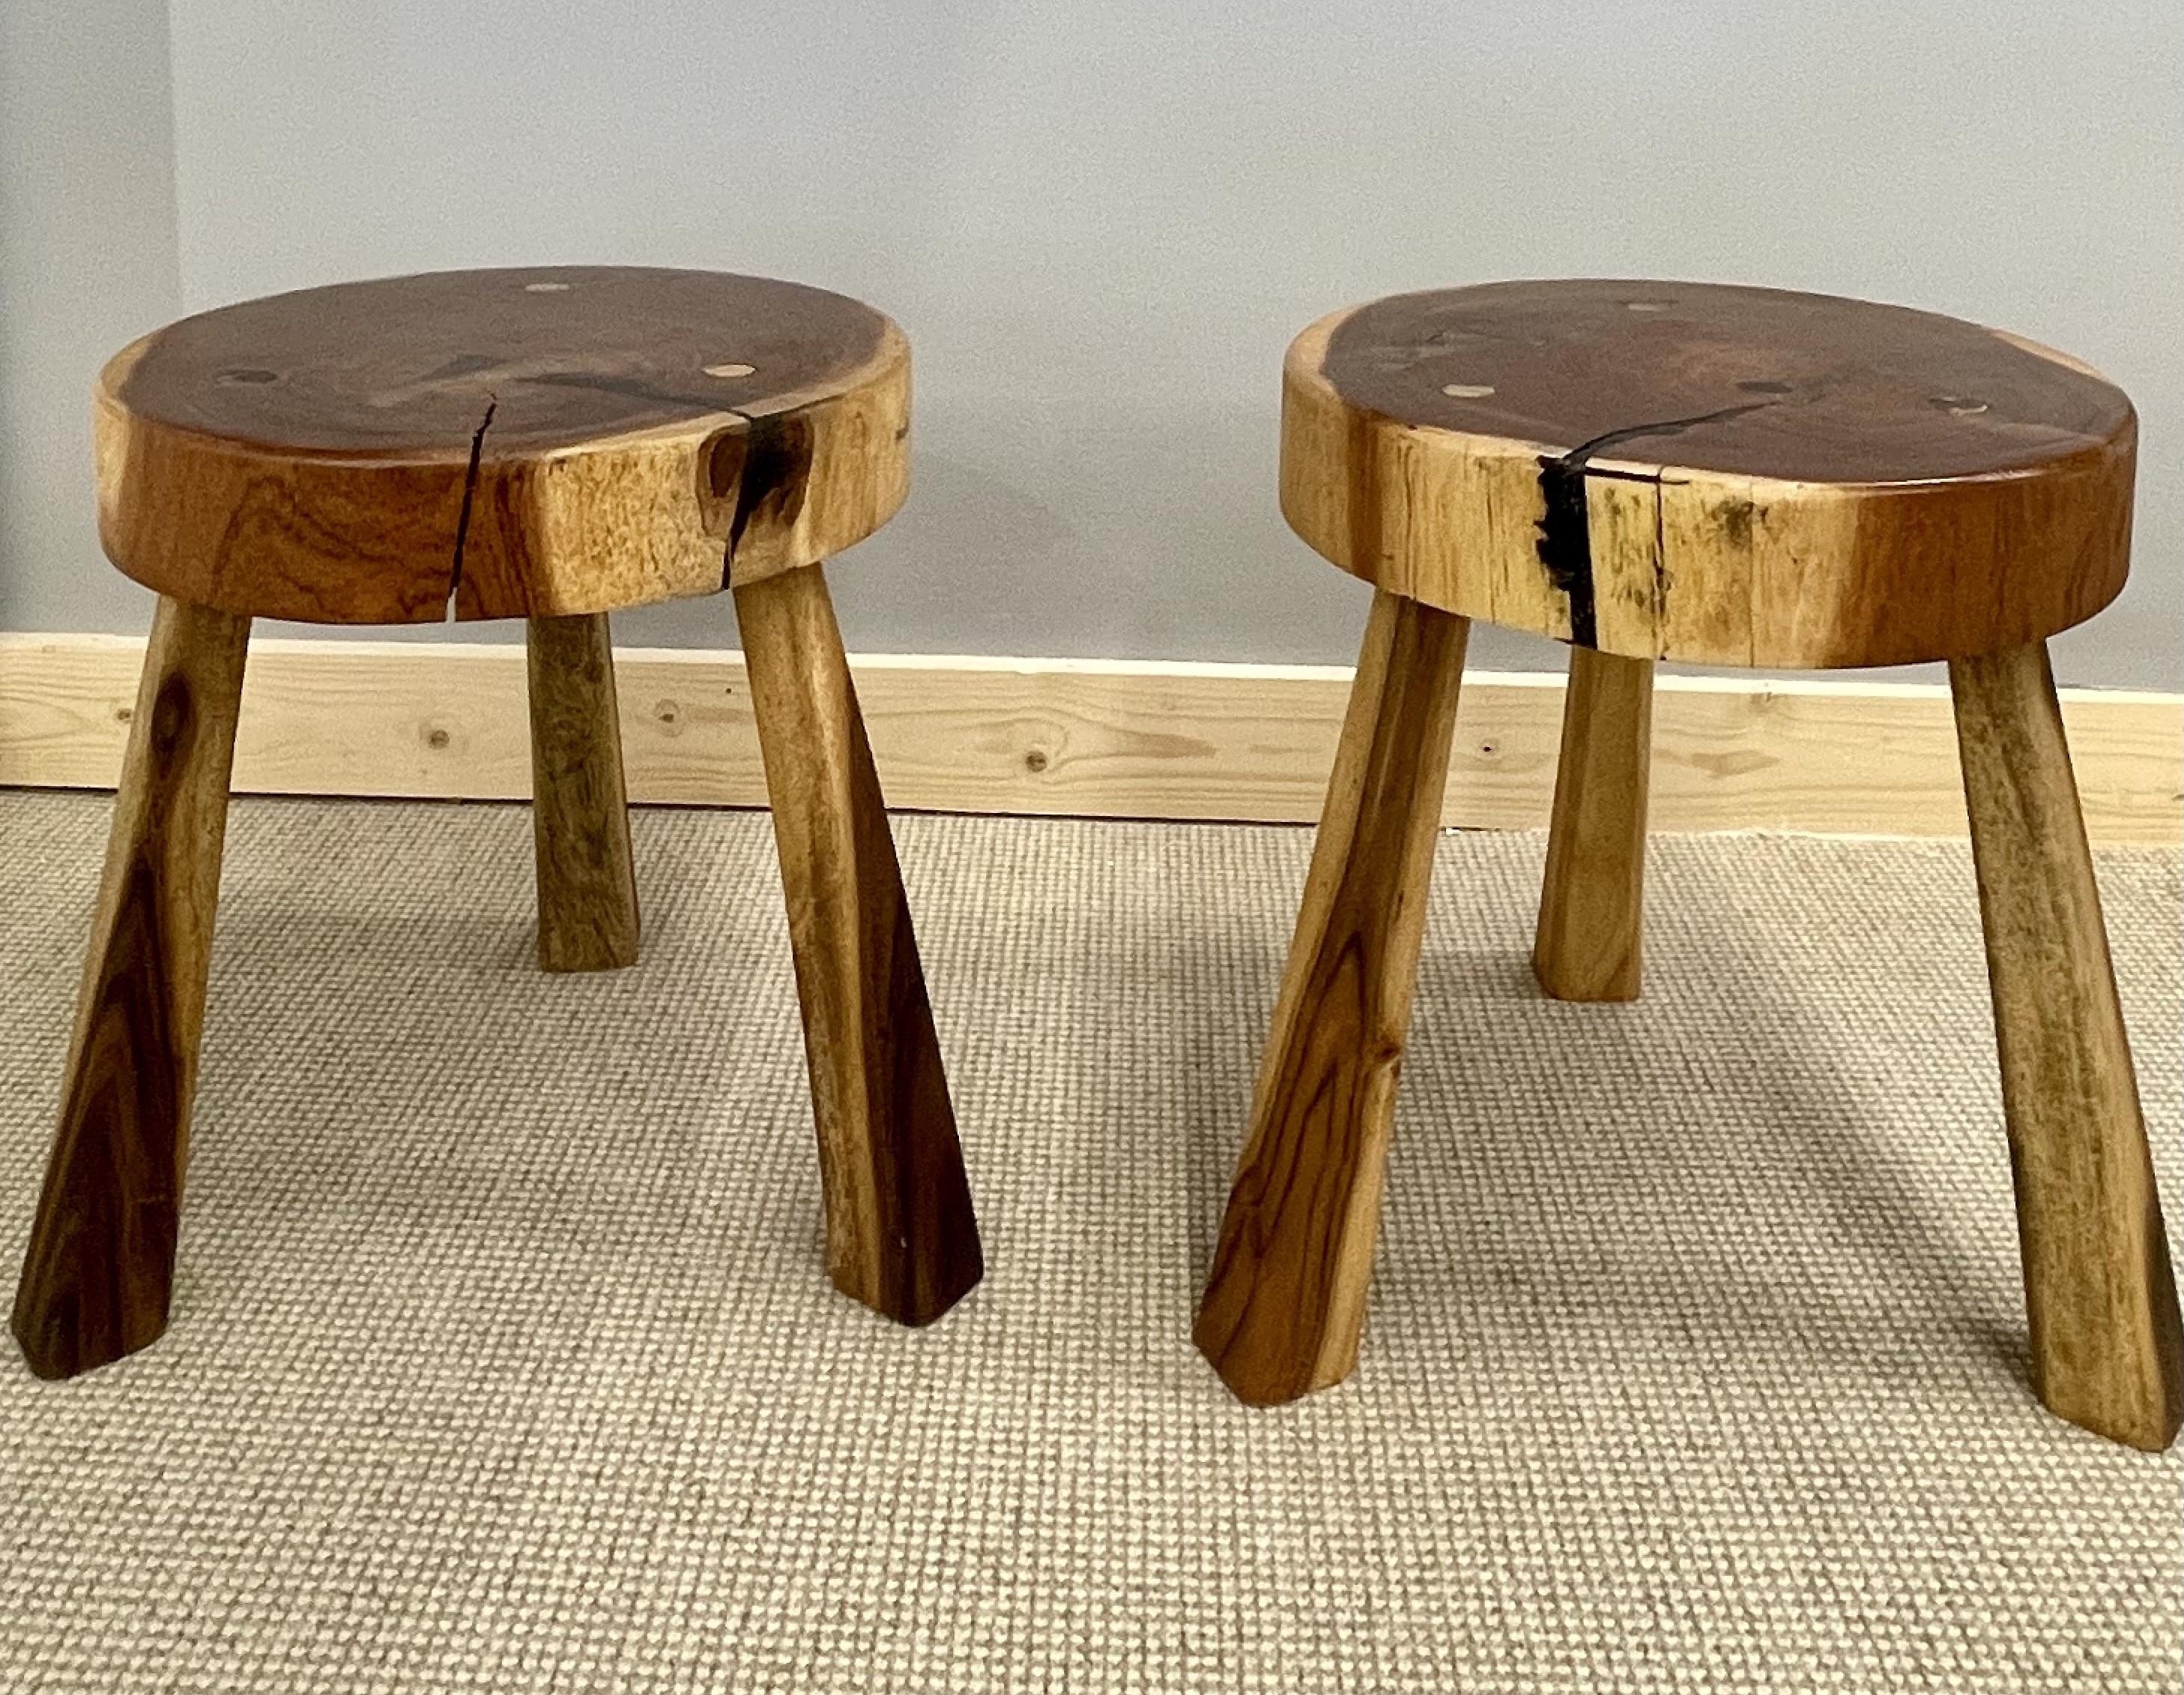 Nakashima Style, Mid-Century Modern, Studio Made Stools, 1970s In Good Condition For Sale In Stamford, CT